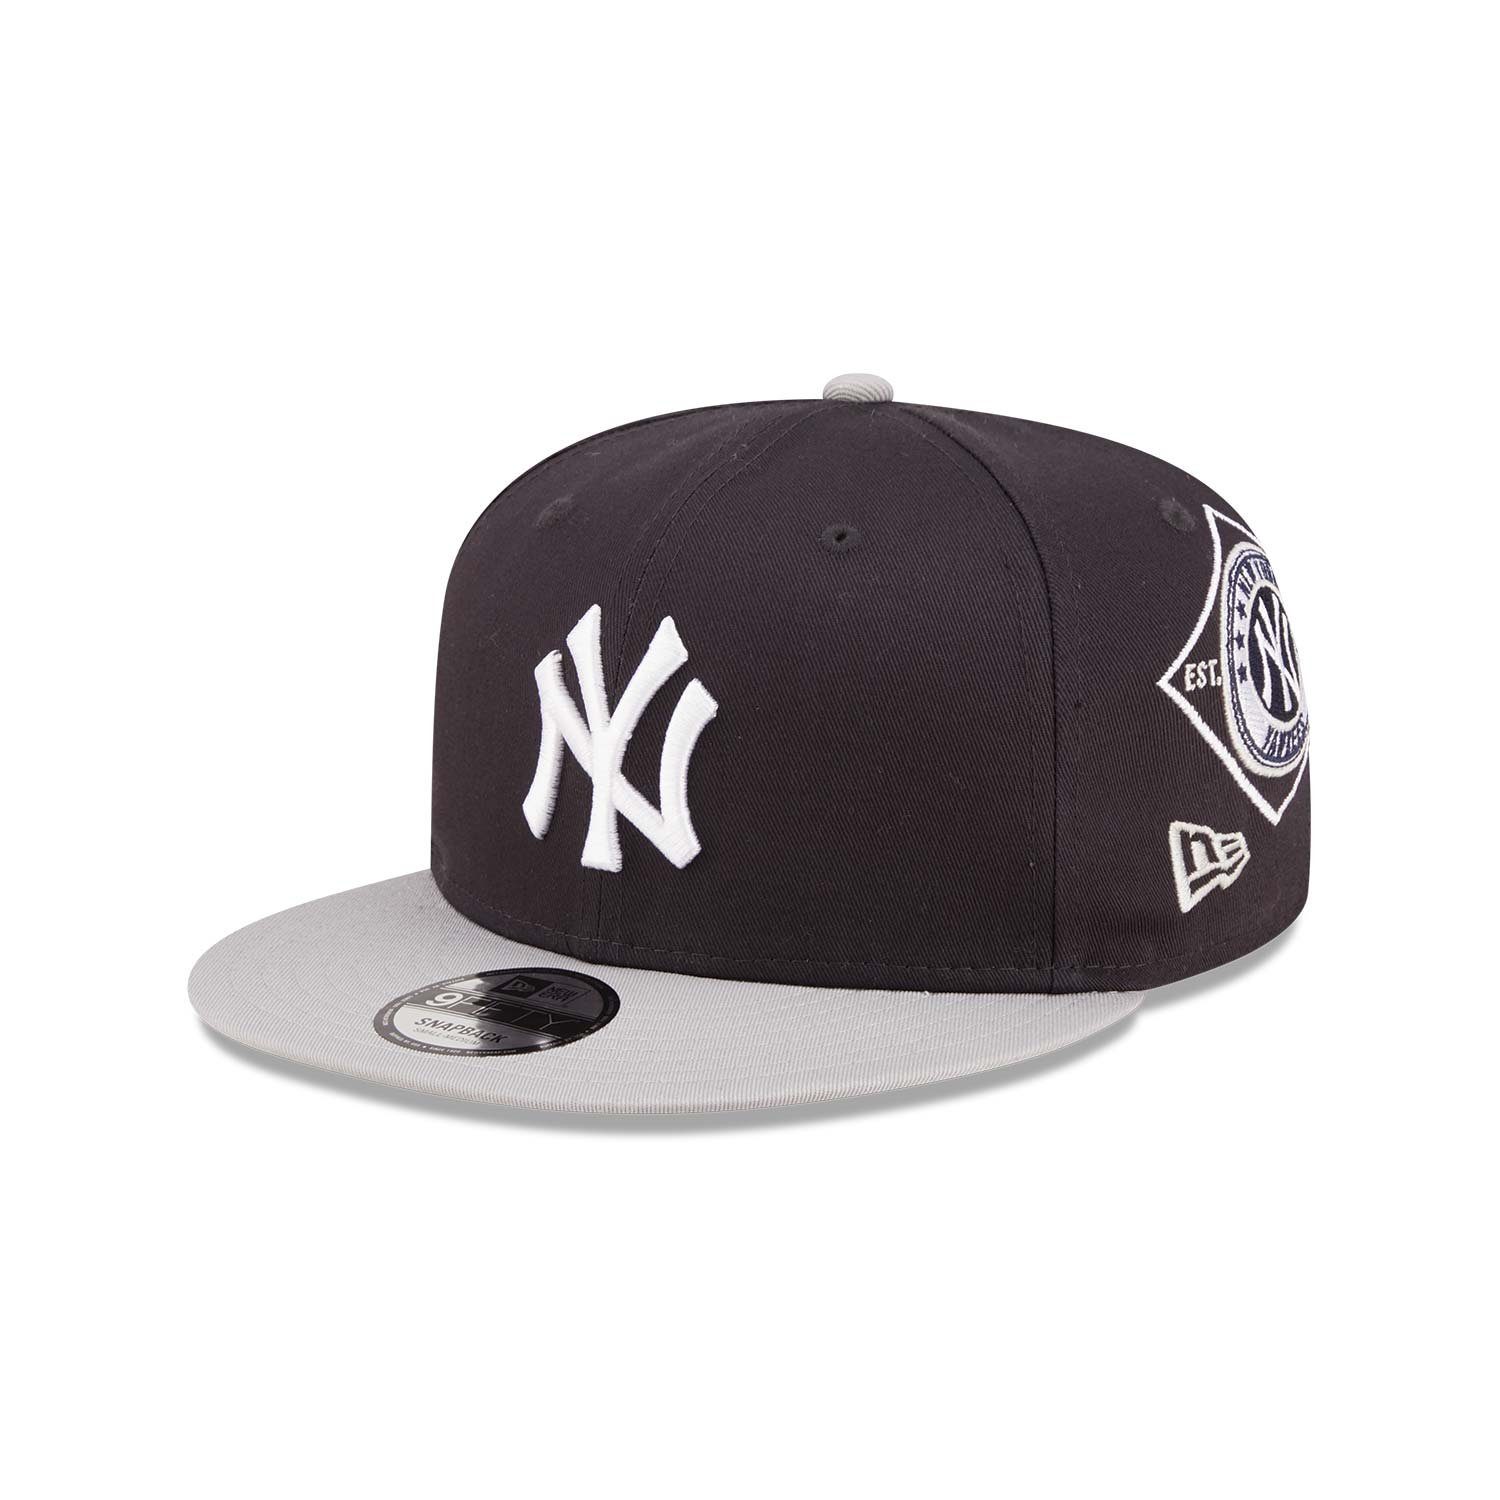 Patches York Cap All Baseball 9FIFTY Era New Yankees Over New